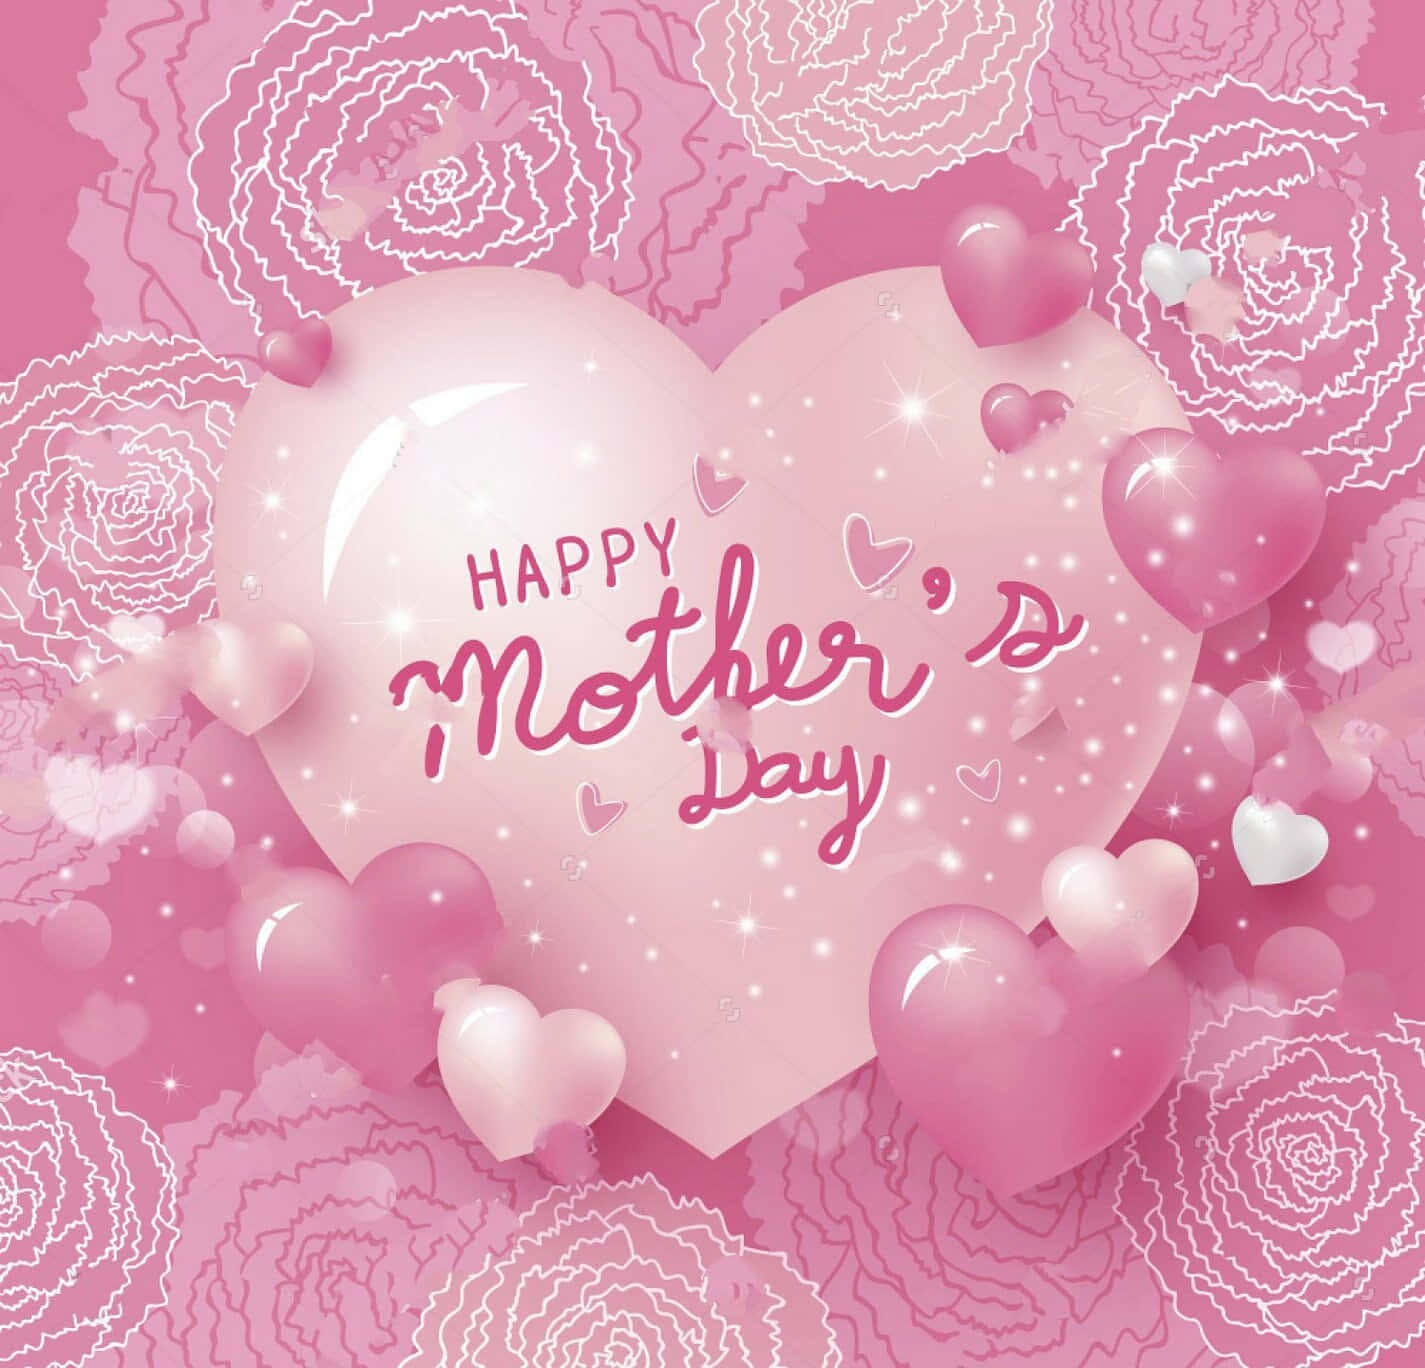 Celebrate Mothers Everywhere on Mother's Day!